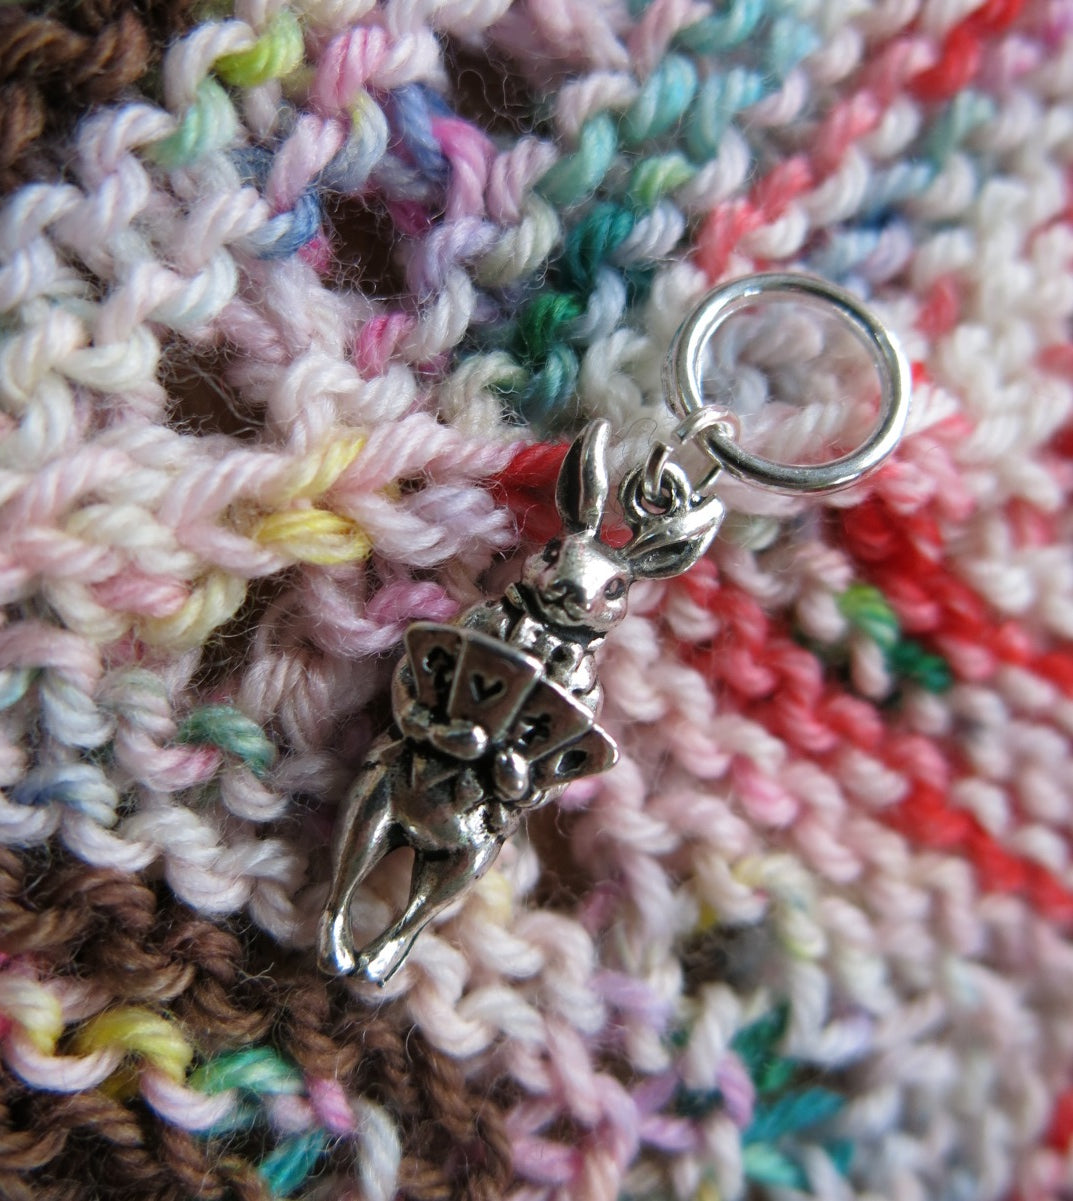 white rabbit stitch marker for knitting projects